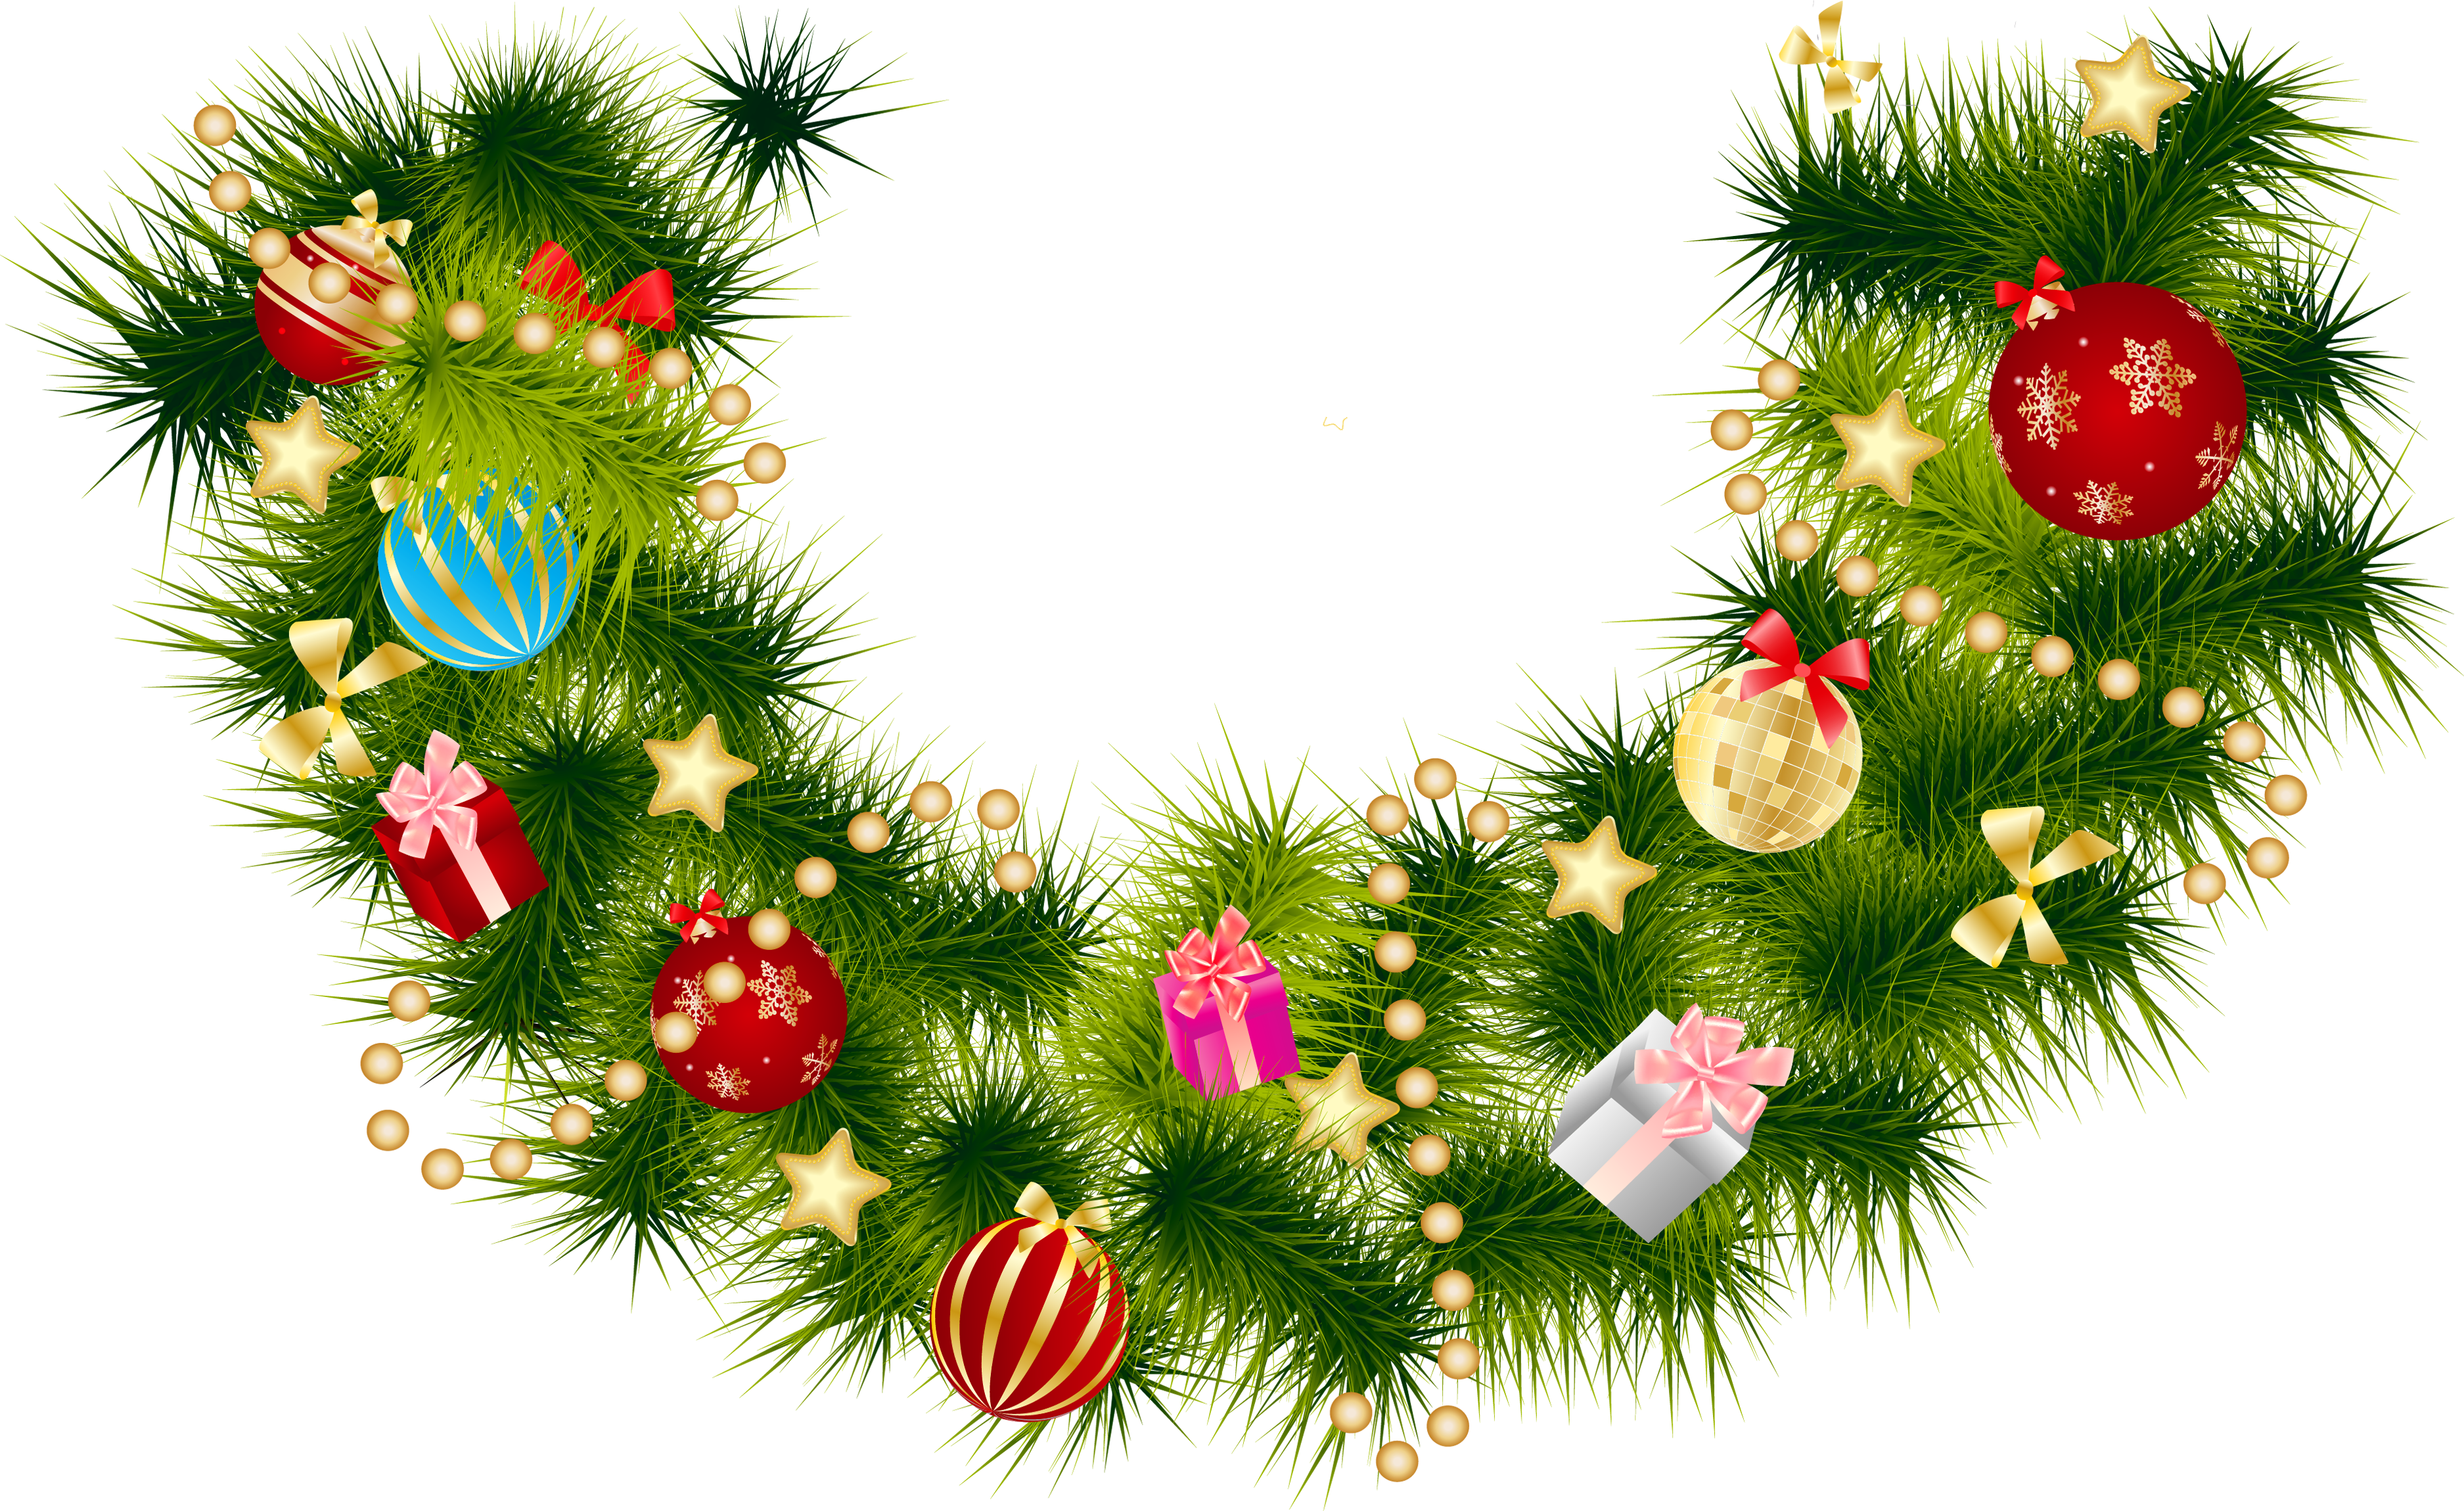 Christmas_Pine_Branch_Garland_with_Ornaments.png?m=1381874400 